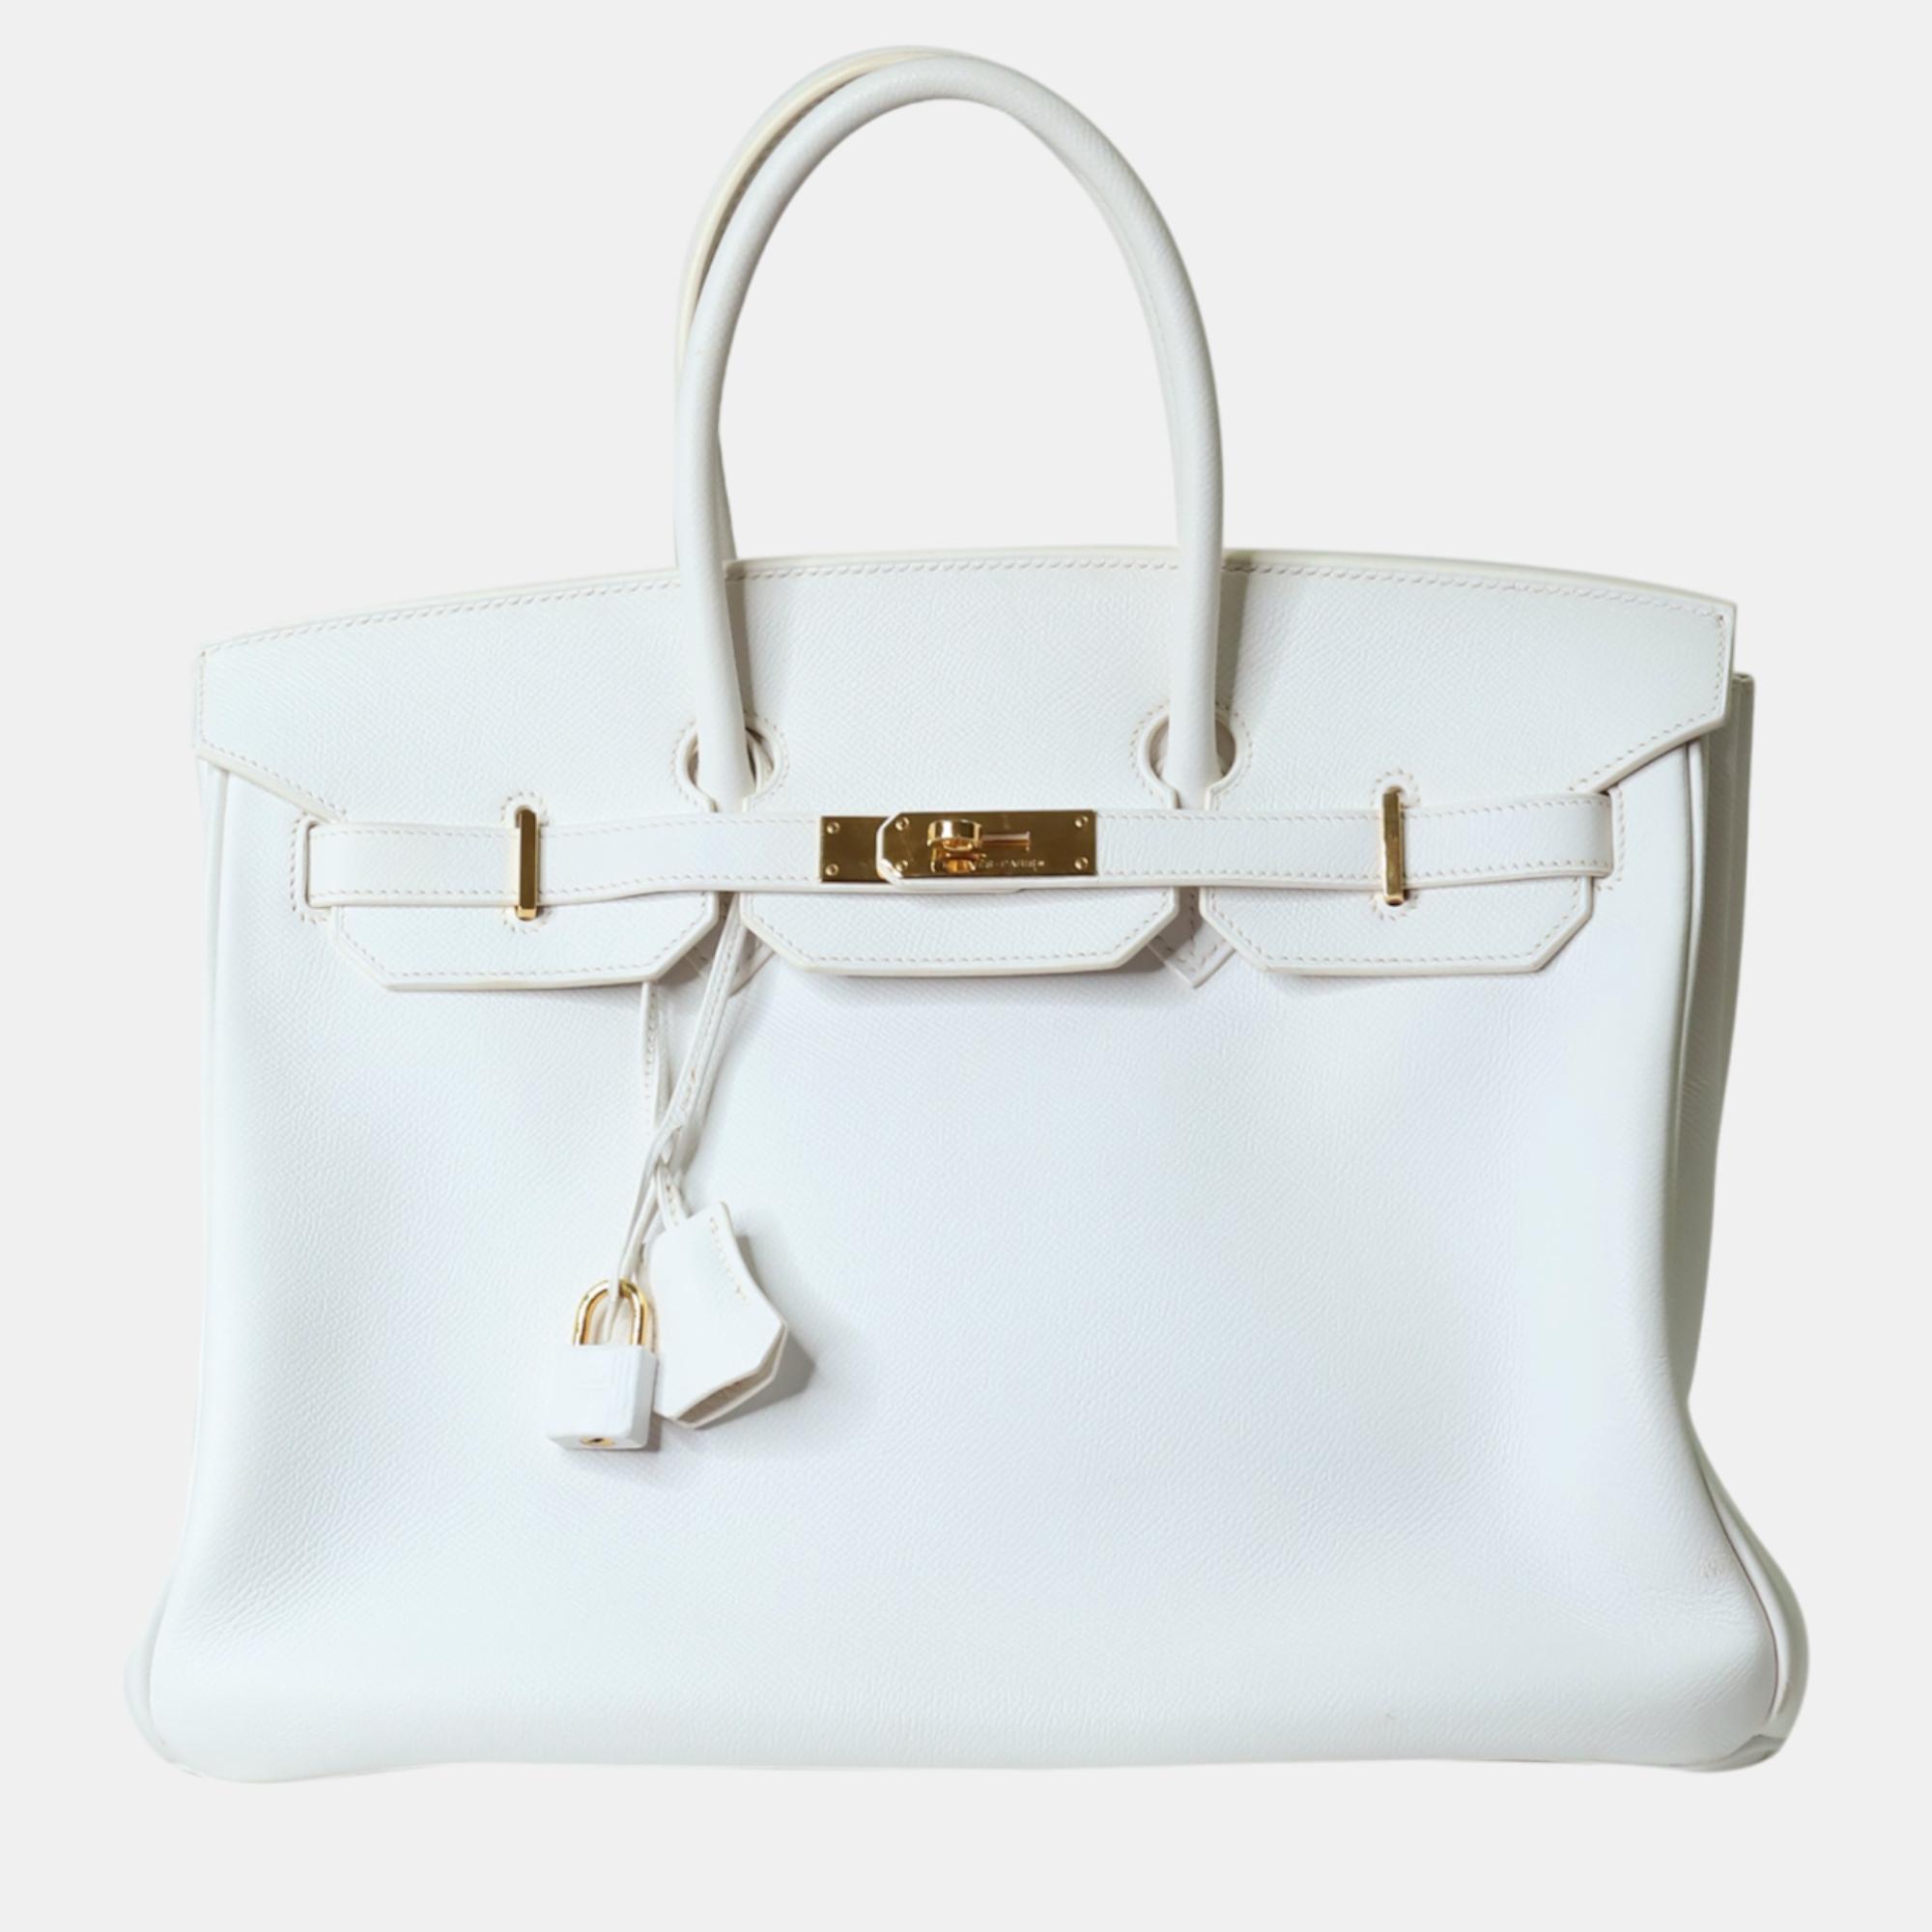 Pre-owned Hermes White Clemence Leather Birkin 35 Bag